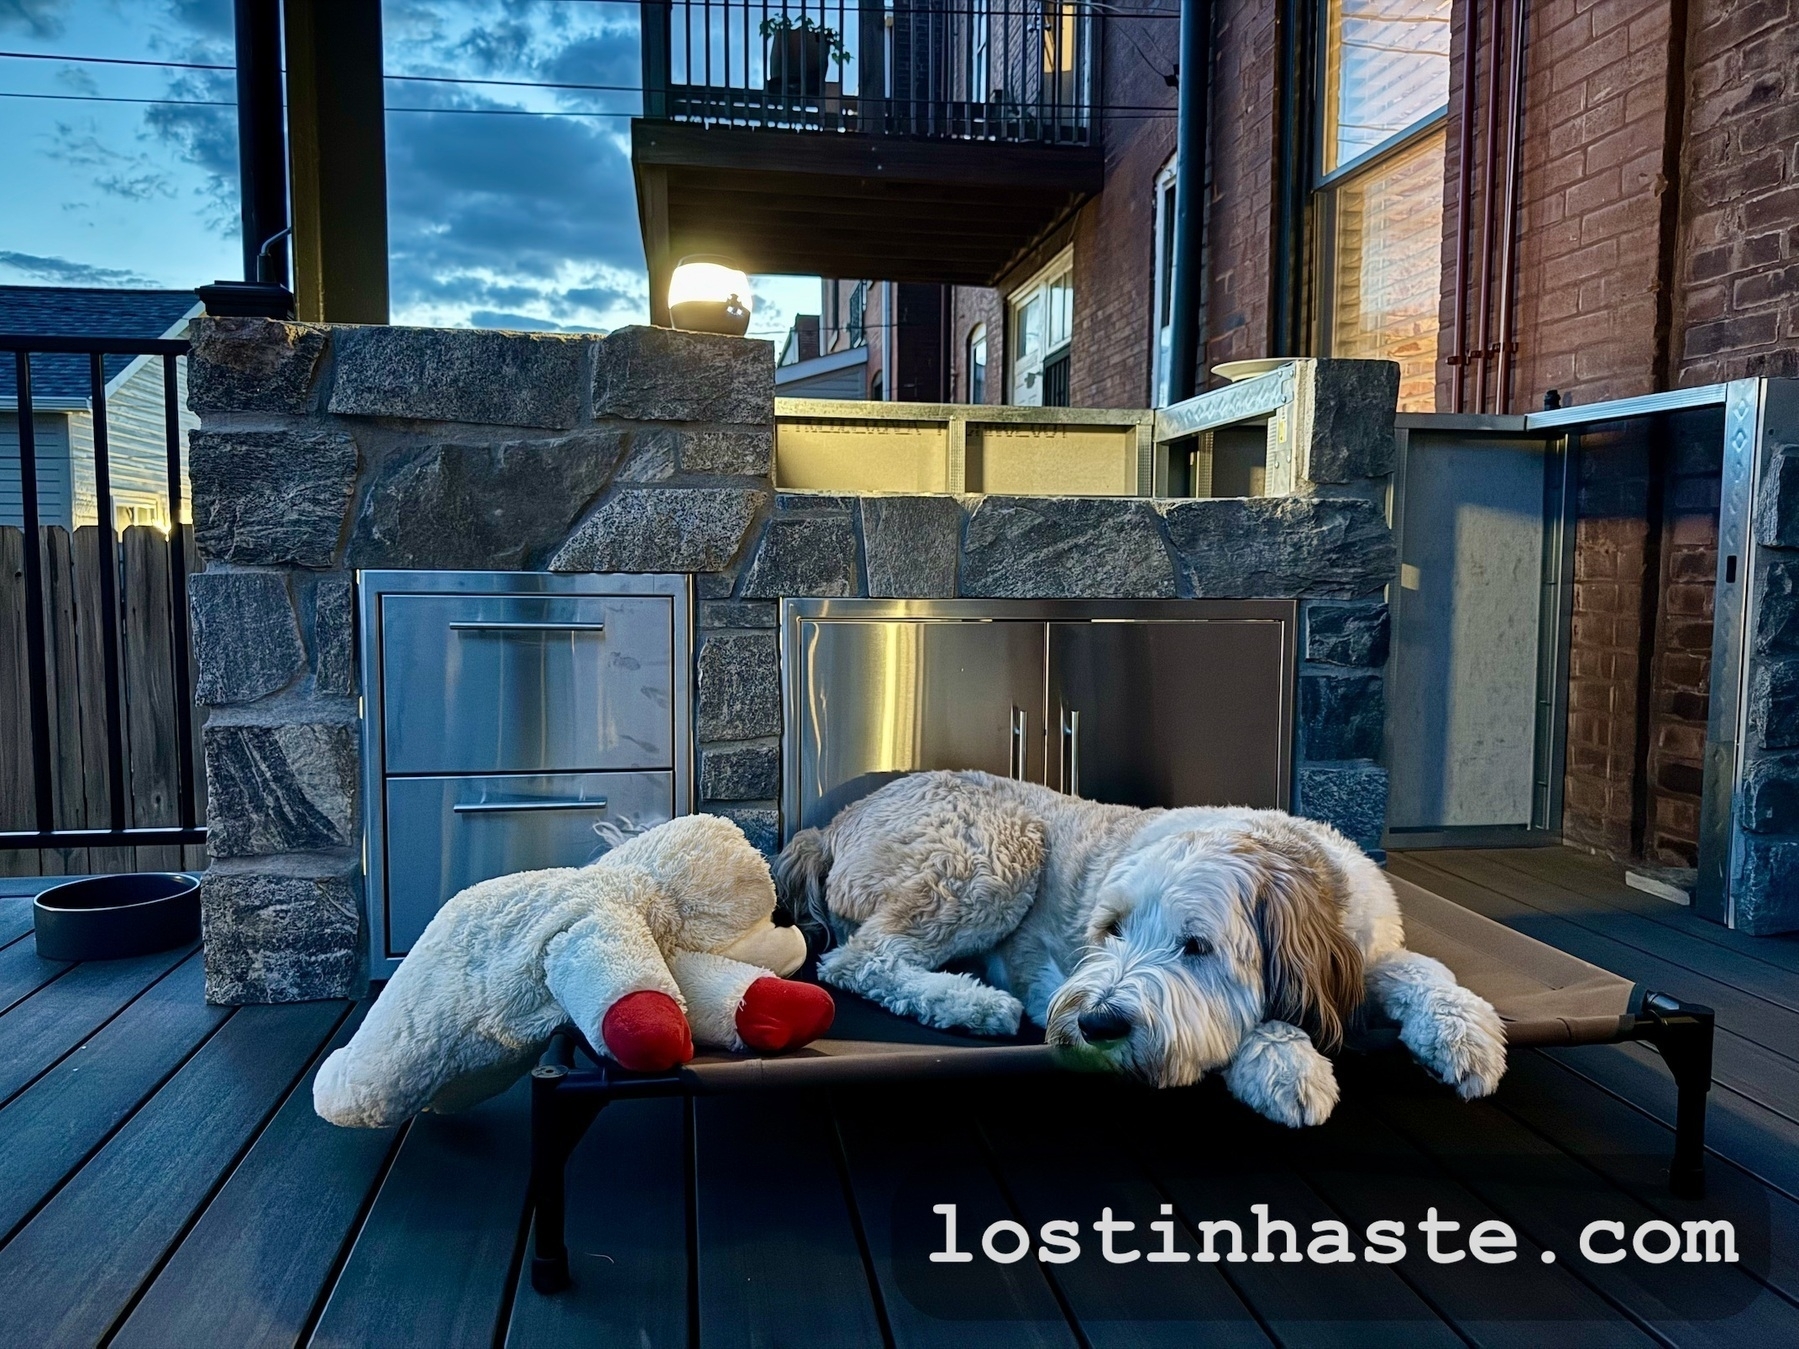 A dog reclines on an outdoor pet bed next to a plush toy, on a deck with stone-built structures and fencing, at dusk.